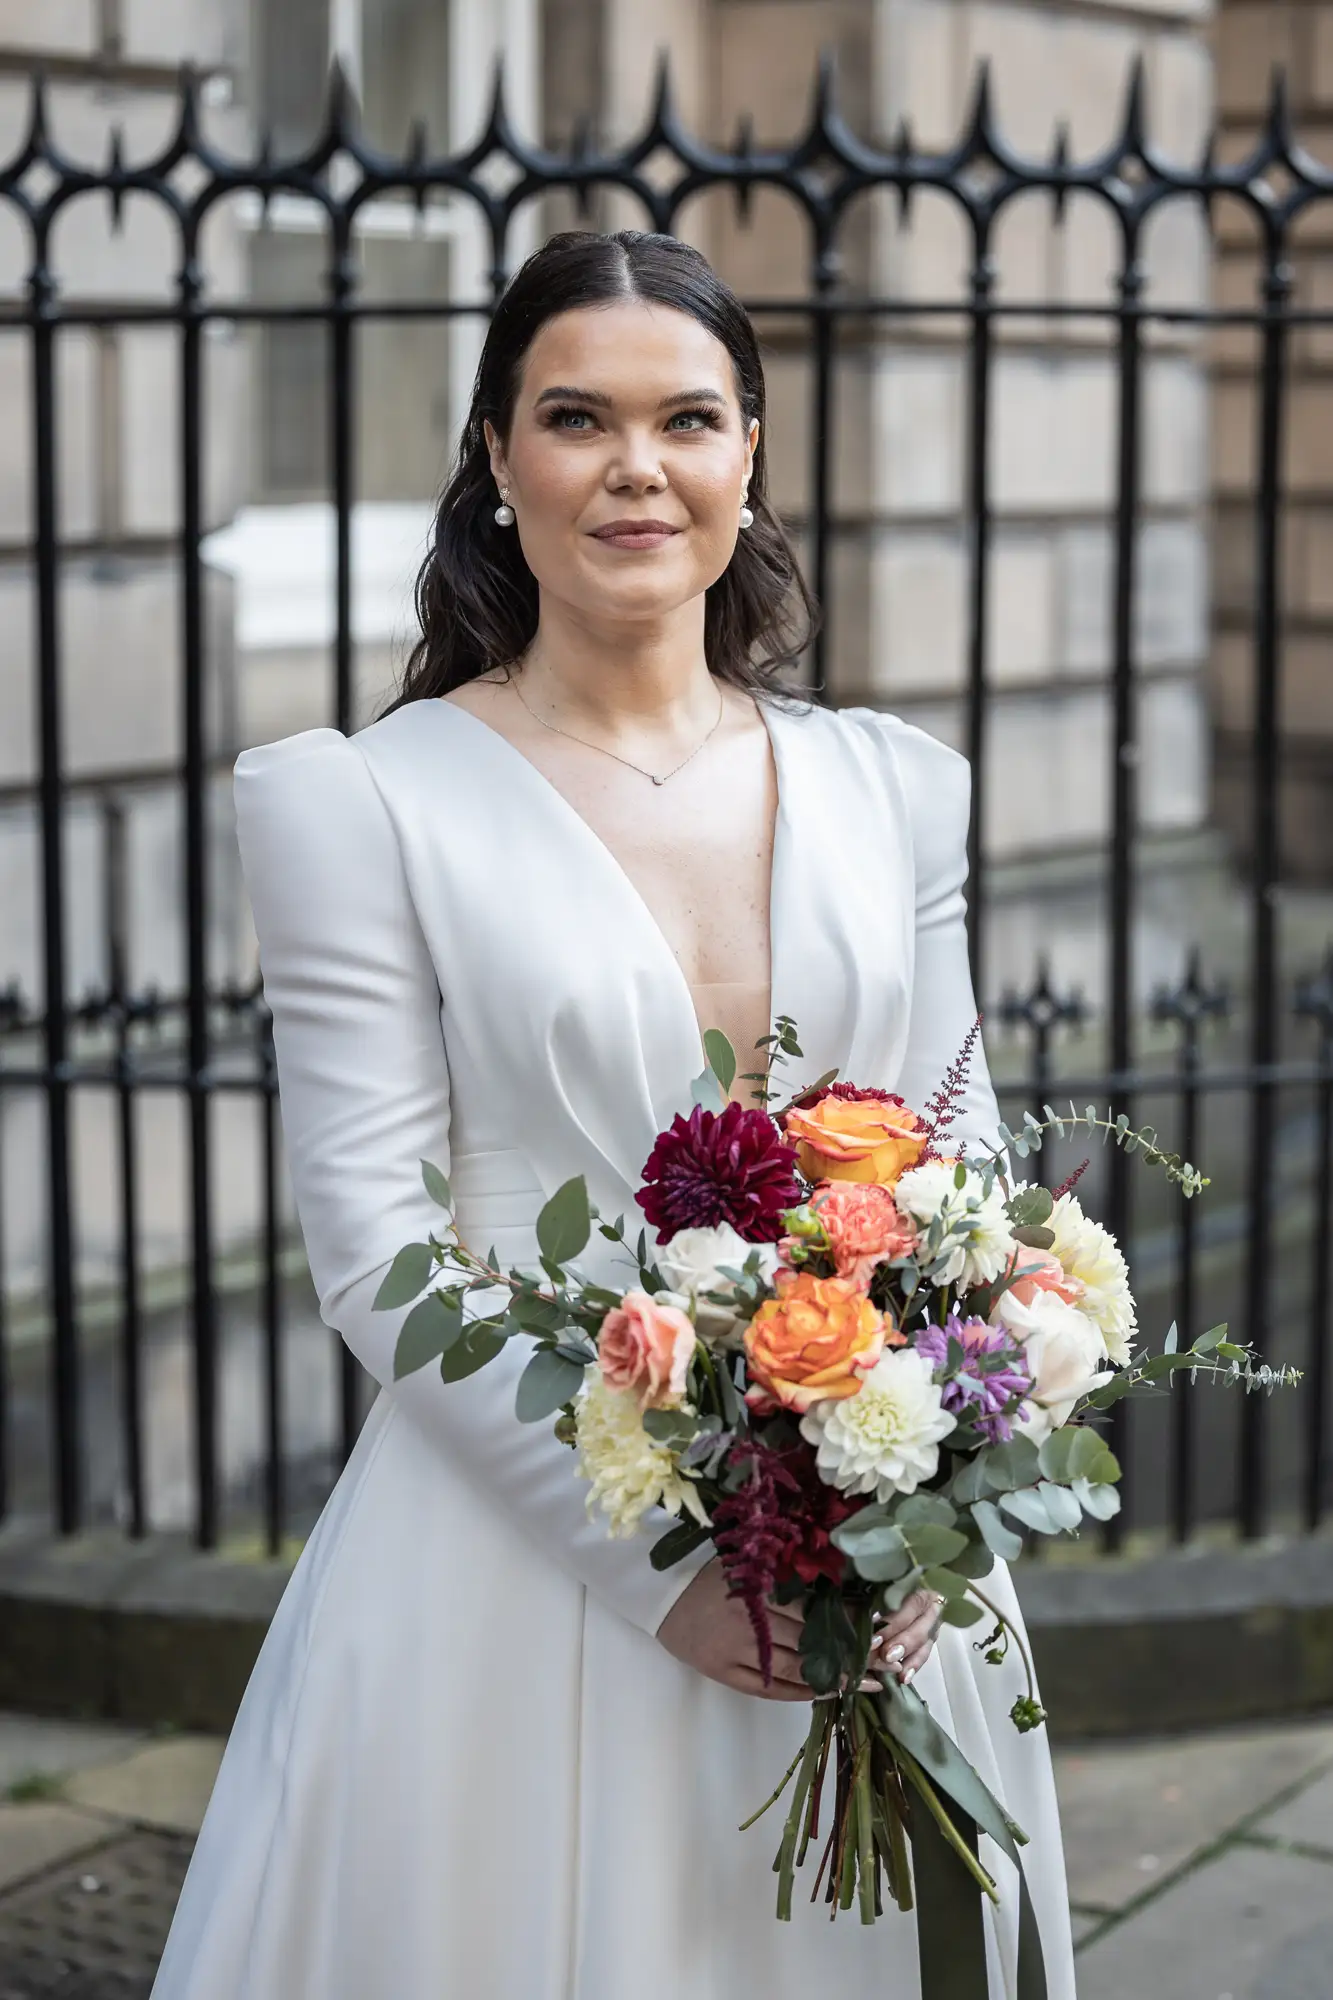 A bride in a white dress holds a colorful bouquet, smiling softly, with a historic building's fence in the background.